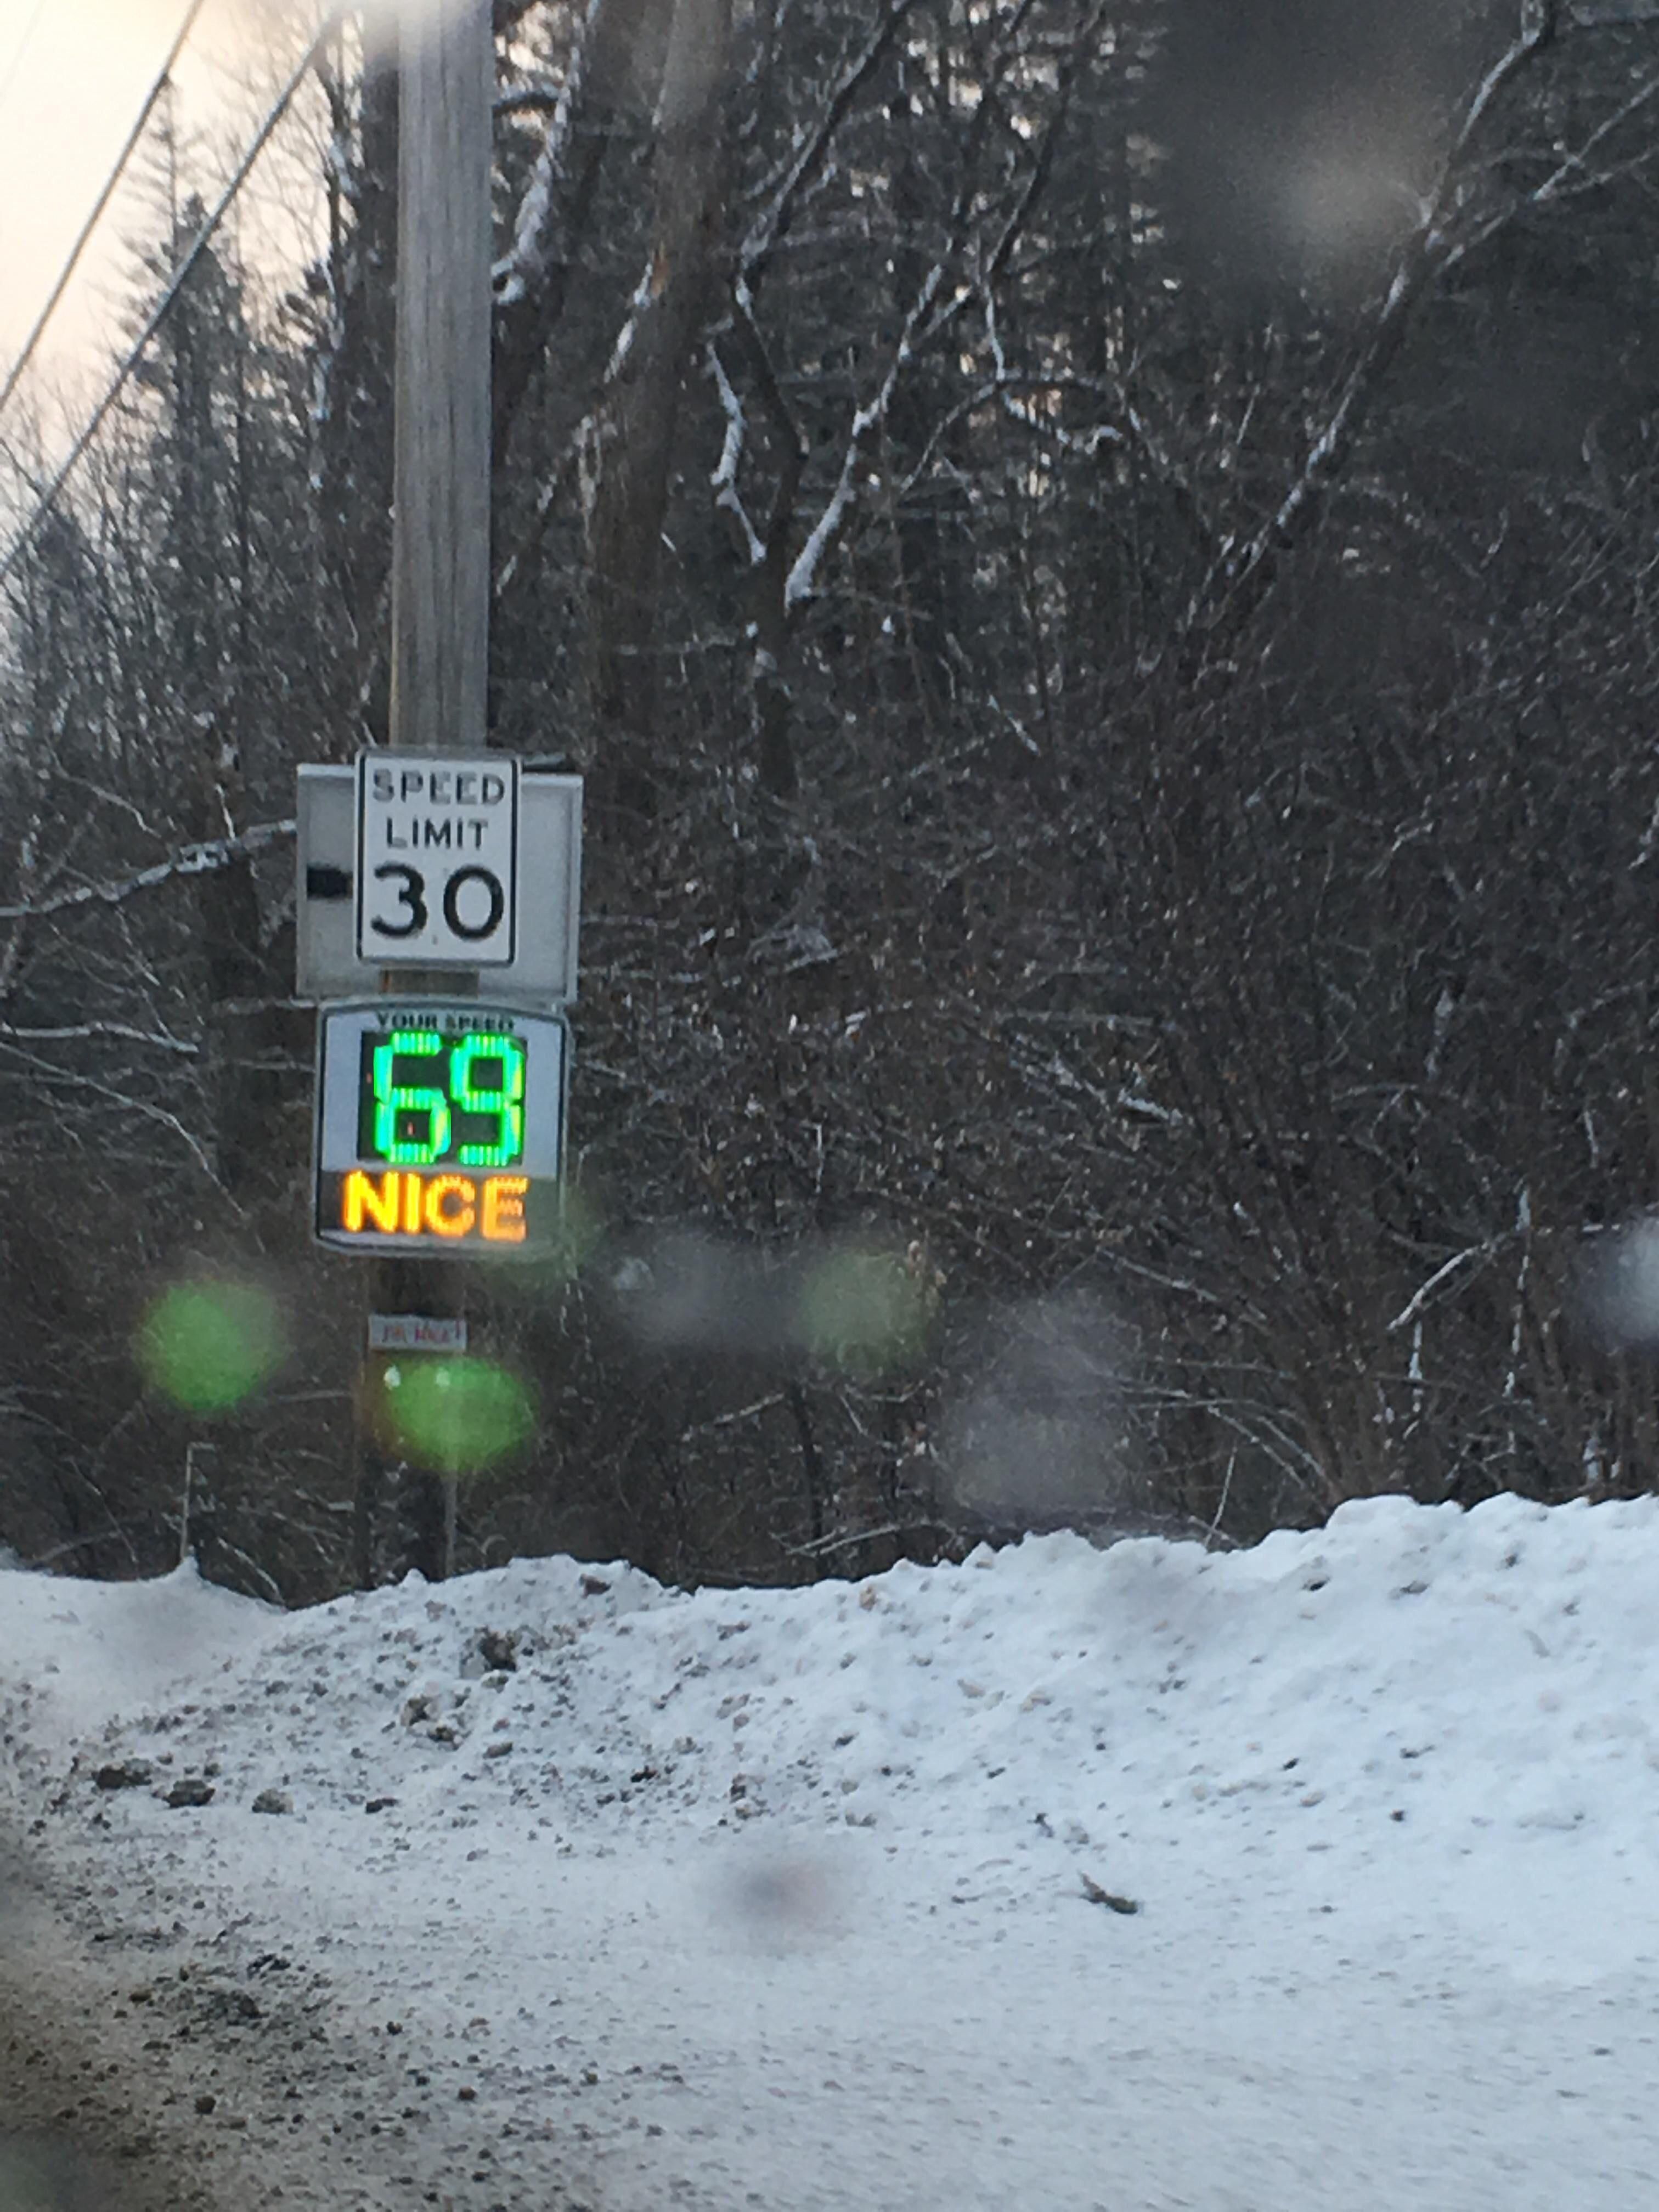 This speed limit sign knows what’s good ;)